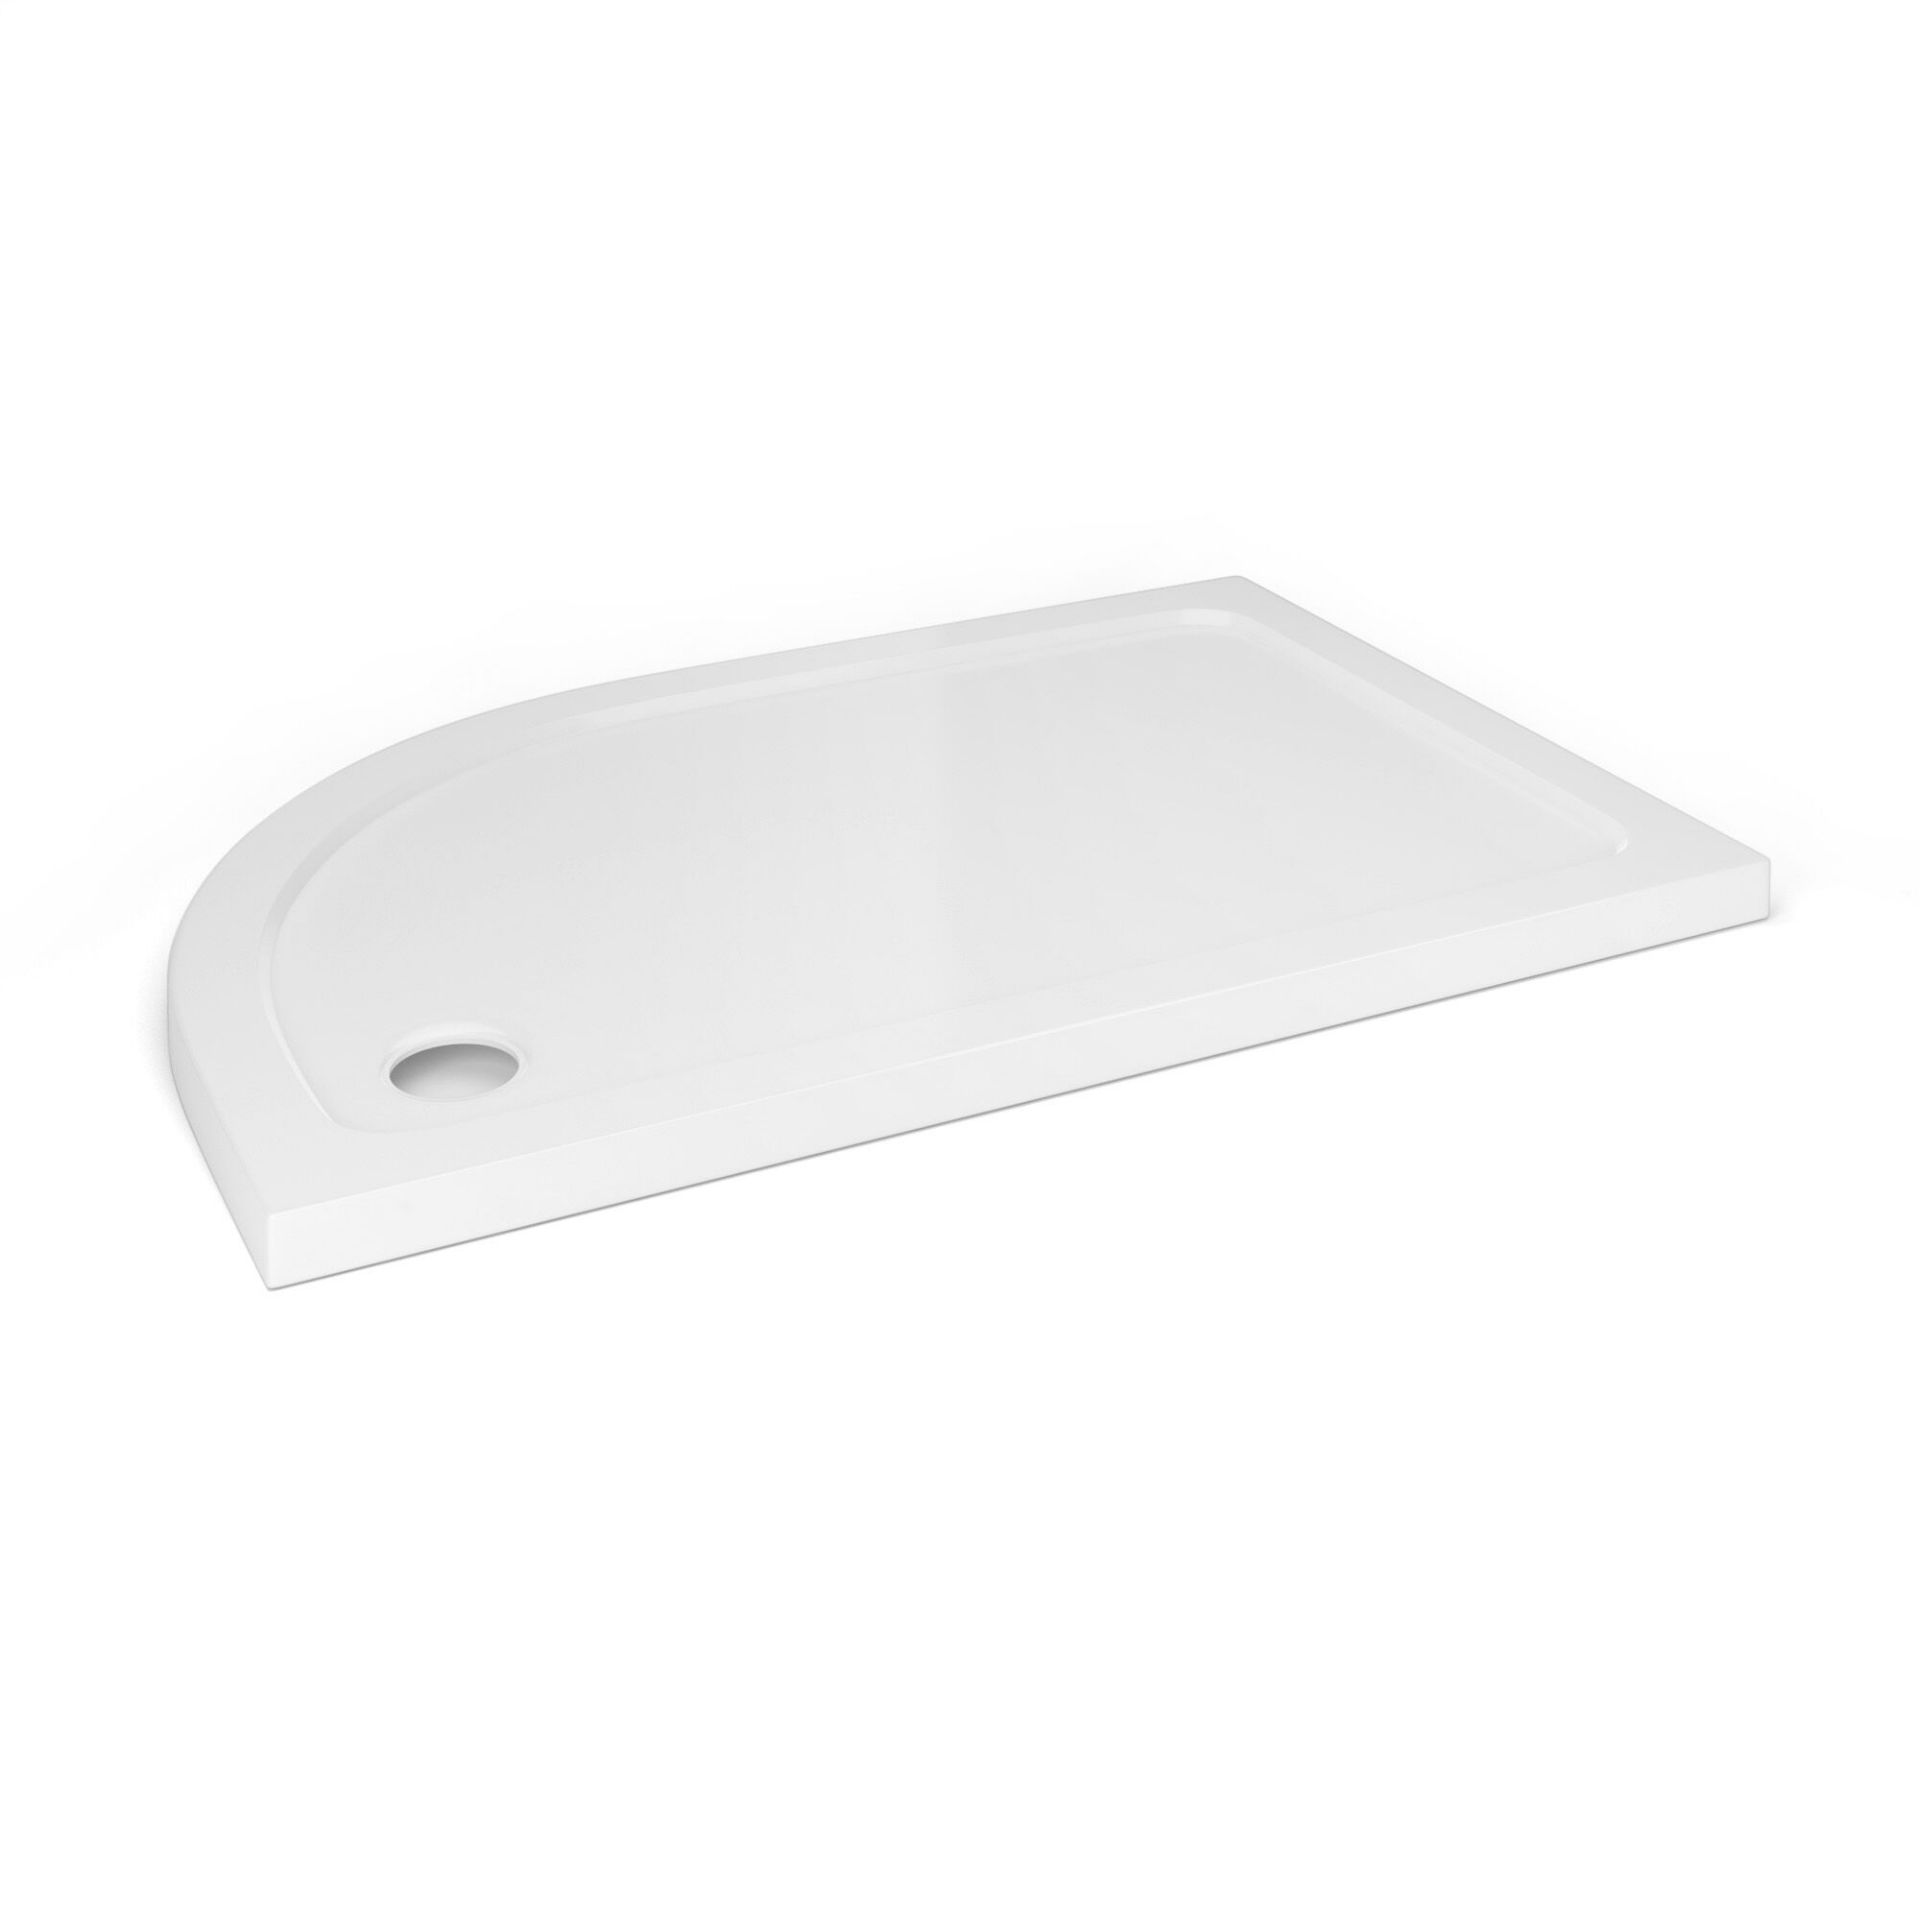 (CP132) 1200x800mm Offset Quadrant Ultra Slim Stone Shower Tray - Right. RRP £343.99. Low prof...